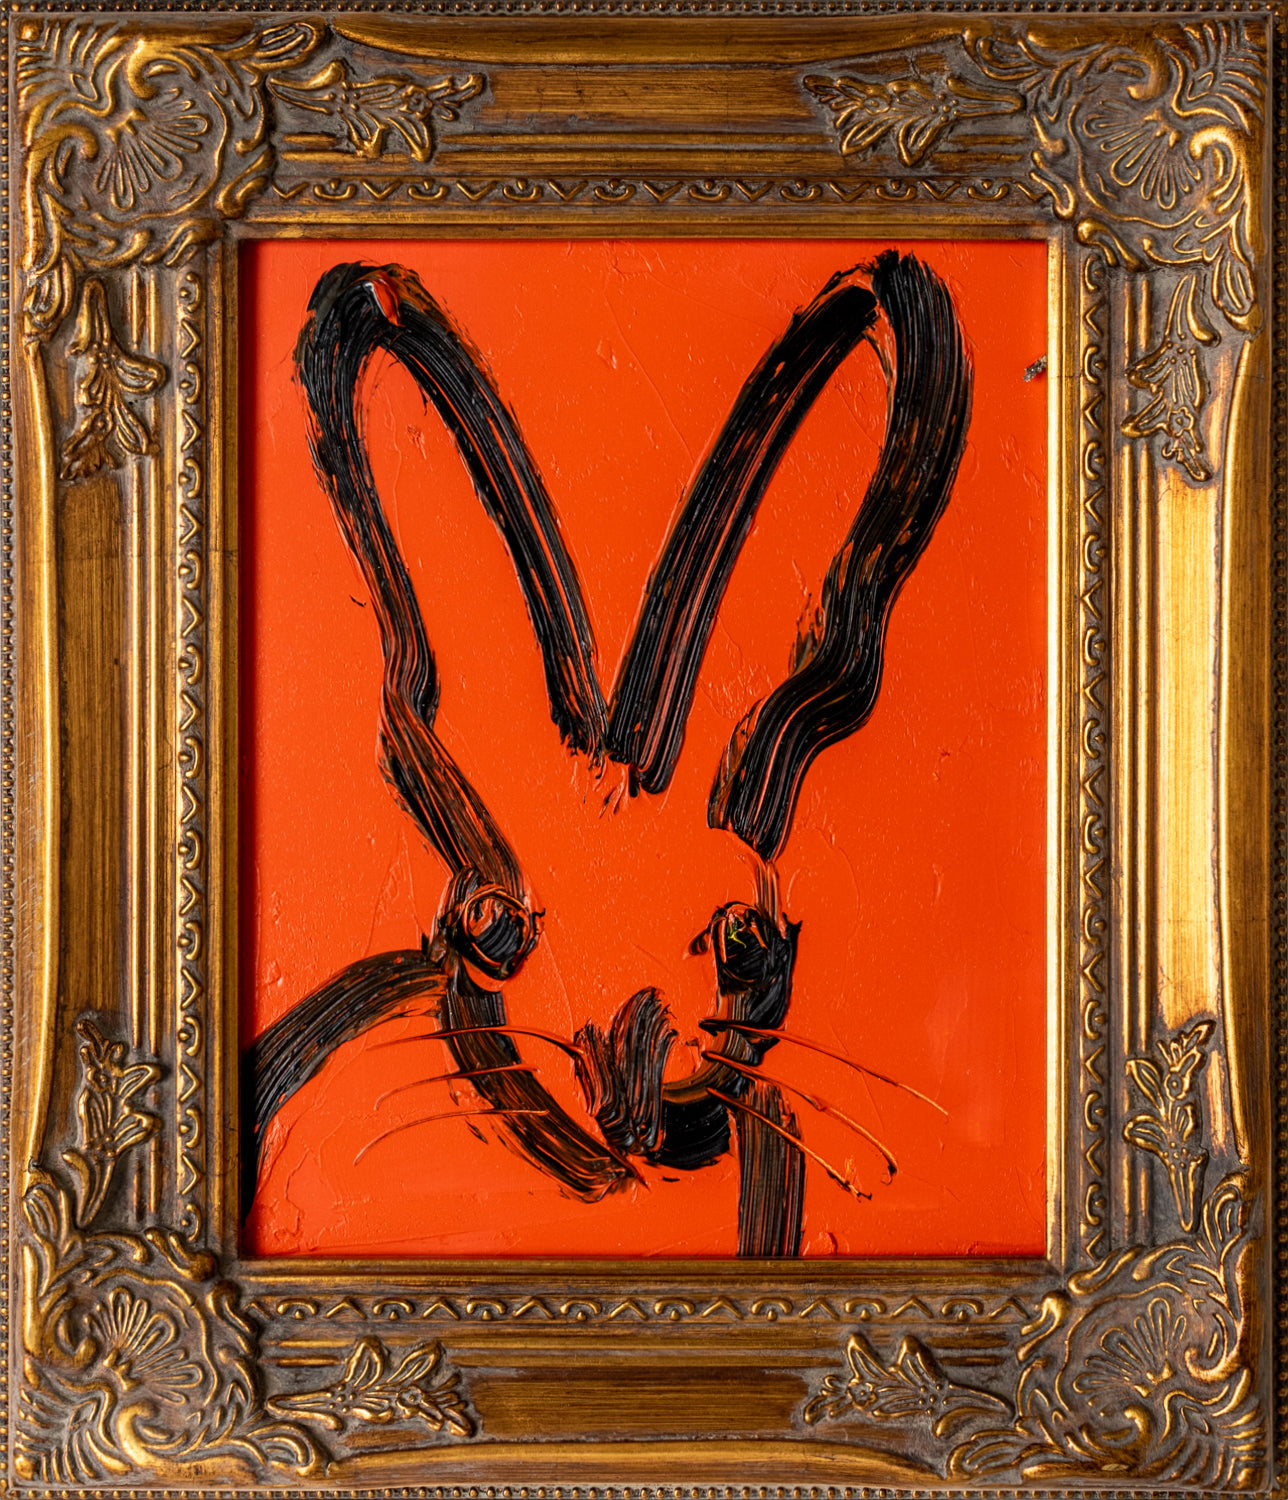 red Hunt Slonem bunny painting “Charlotte,”2021, Oil on wood, 10 x 8 inches, in antique gold frame, Hunt Slonem Bunnies for sale at Manolis Projects Gallery